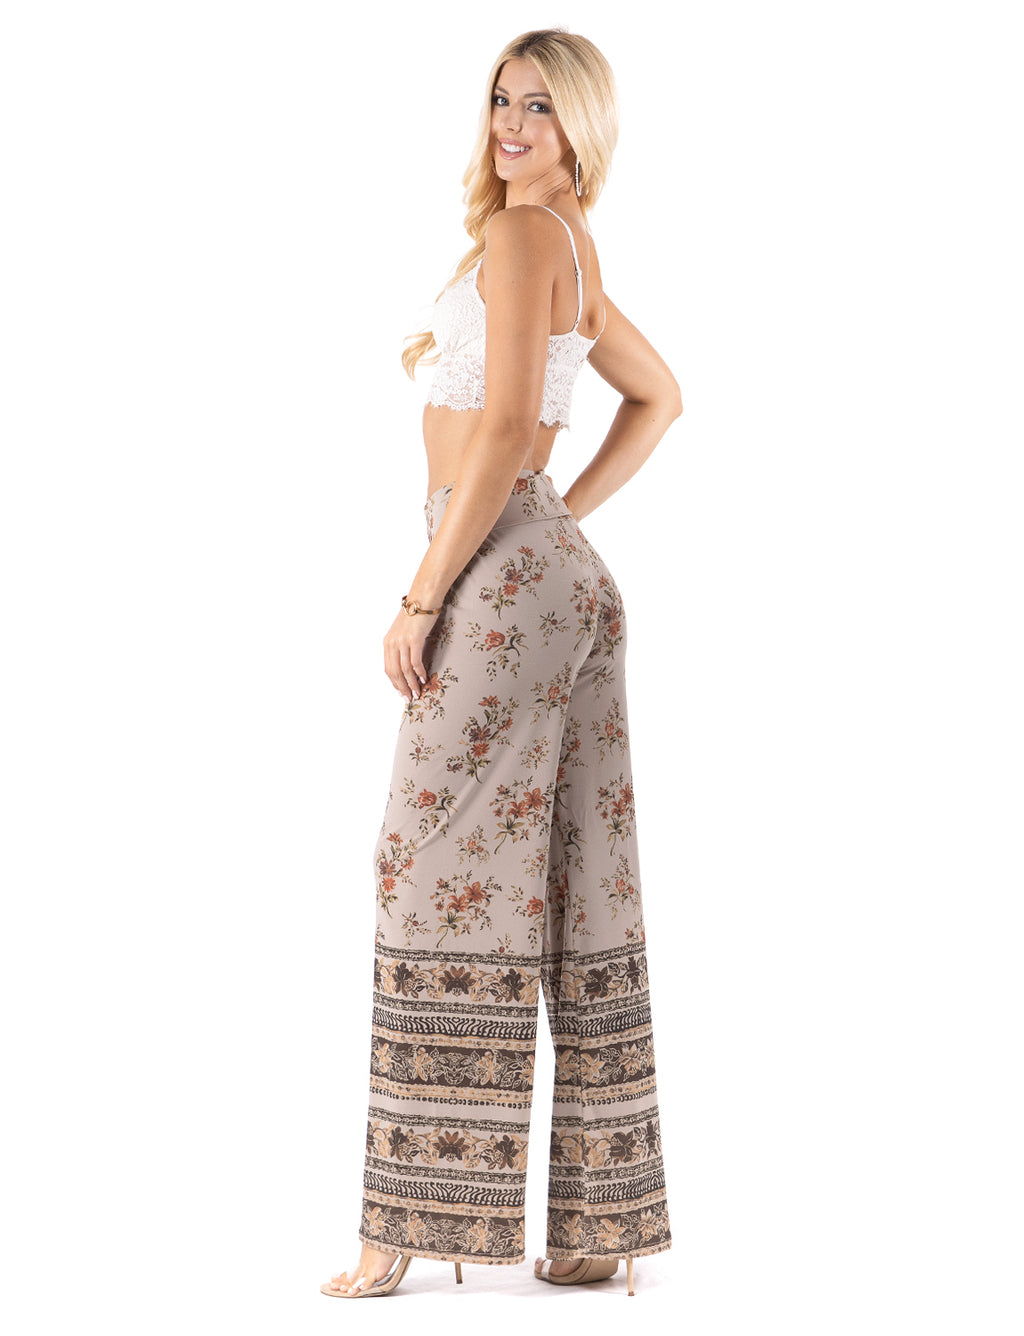 Beautiful woman wearing this amazing Light Tan Floral High waist palazzo pants featuring wide legs, and a comfortable stretchy fabric Perfect during spring, summer,Concerts, Festivals, Dance, Brunch